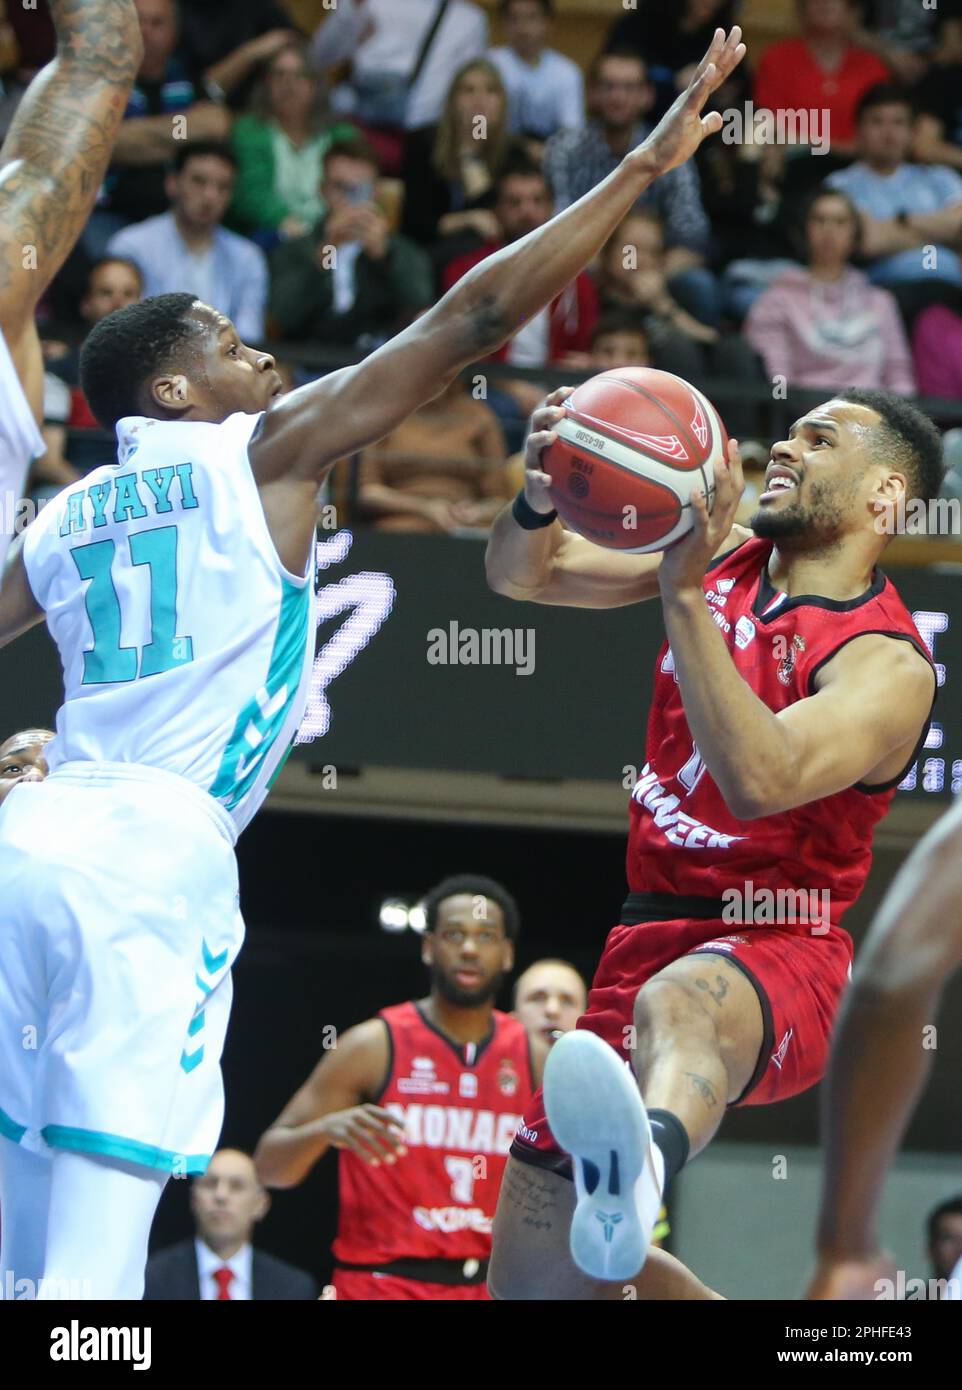 Elie OKOBO of AS Monaco and Gerald AYAYI of ƒlan bŽarnais  Pau-Lacq-Orthezduring the French cup, Top 8, quarter-finals Basketball  match between ƒlan bŽarnais Pau-Lacq-Orthez and AS Monaco on March 18, 2023  at